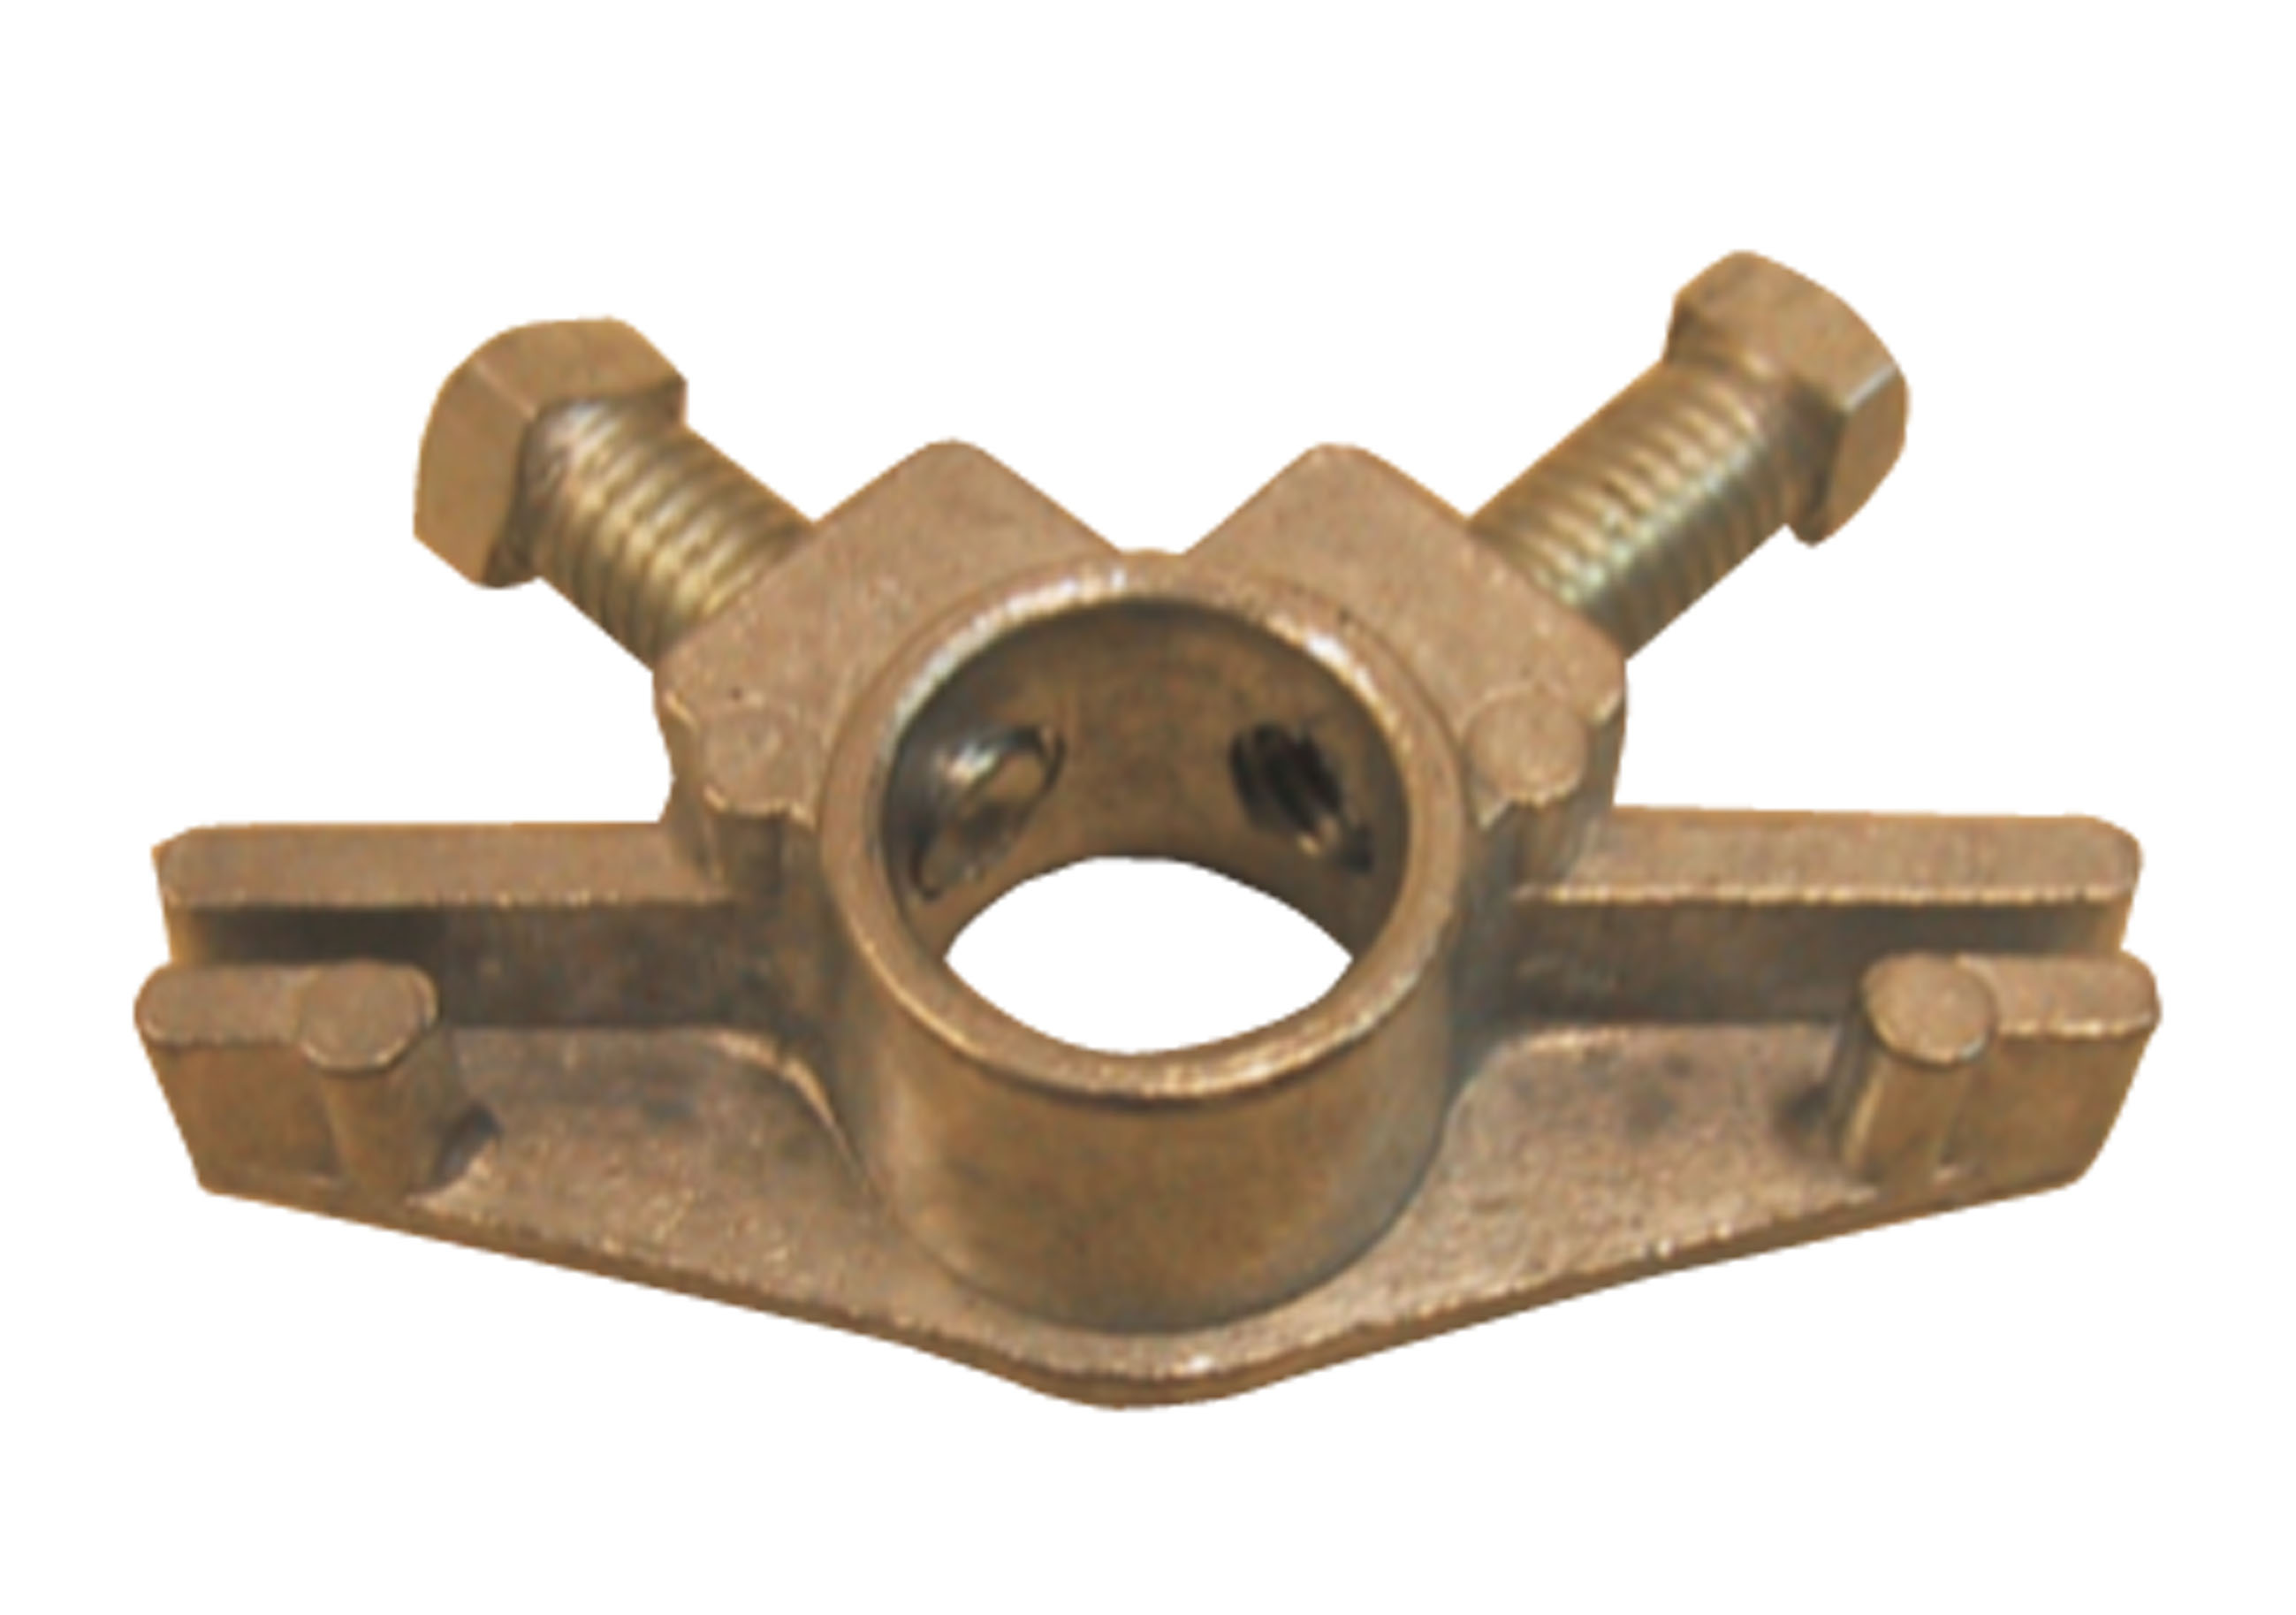 Multi blade type fire damper fusible link